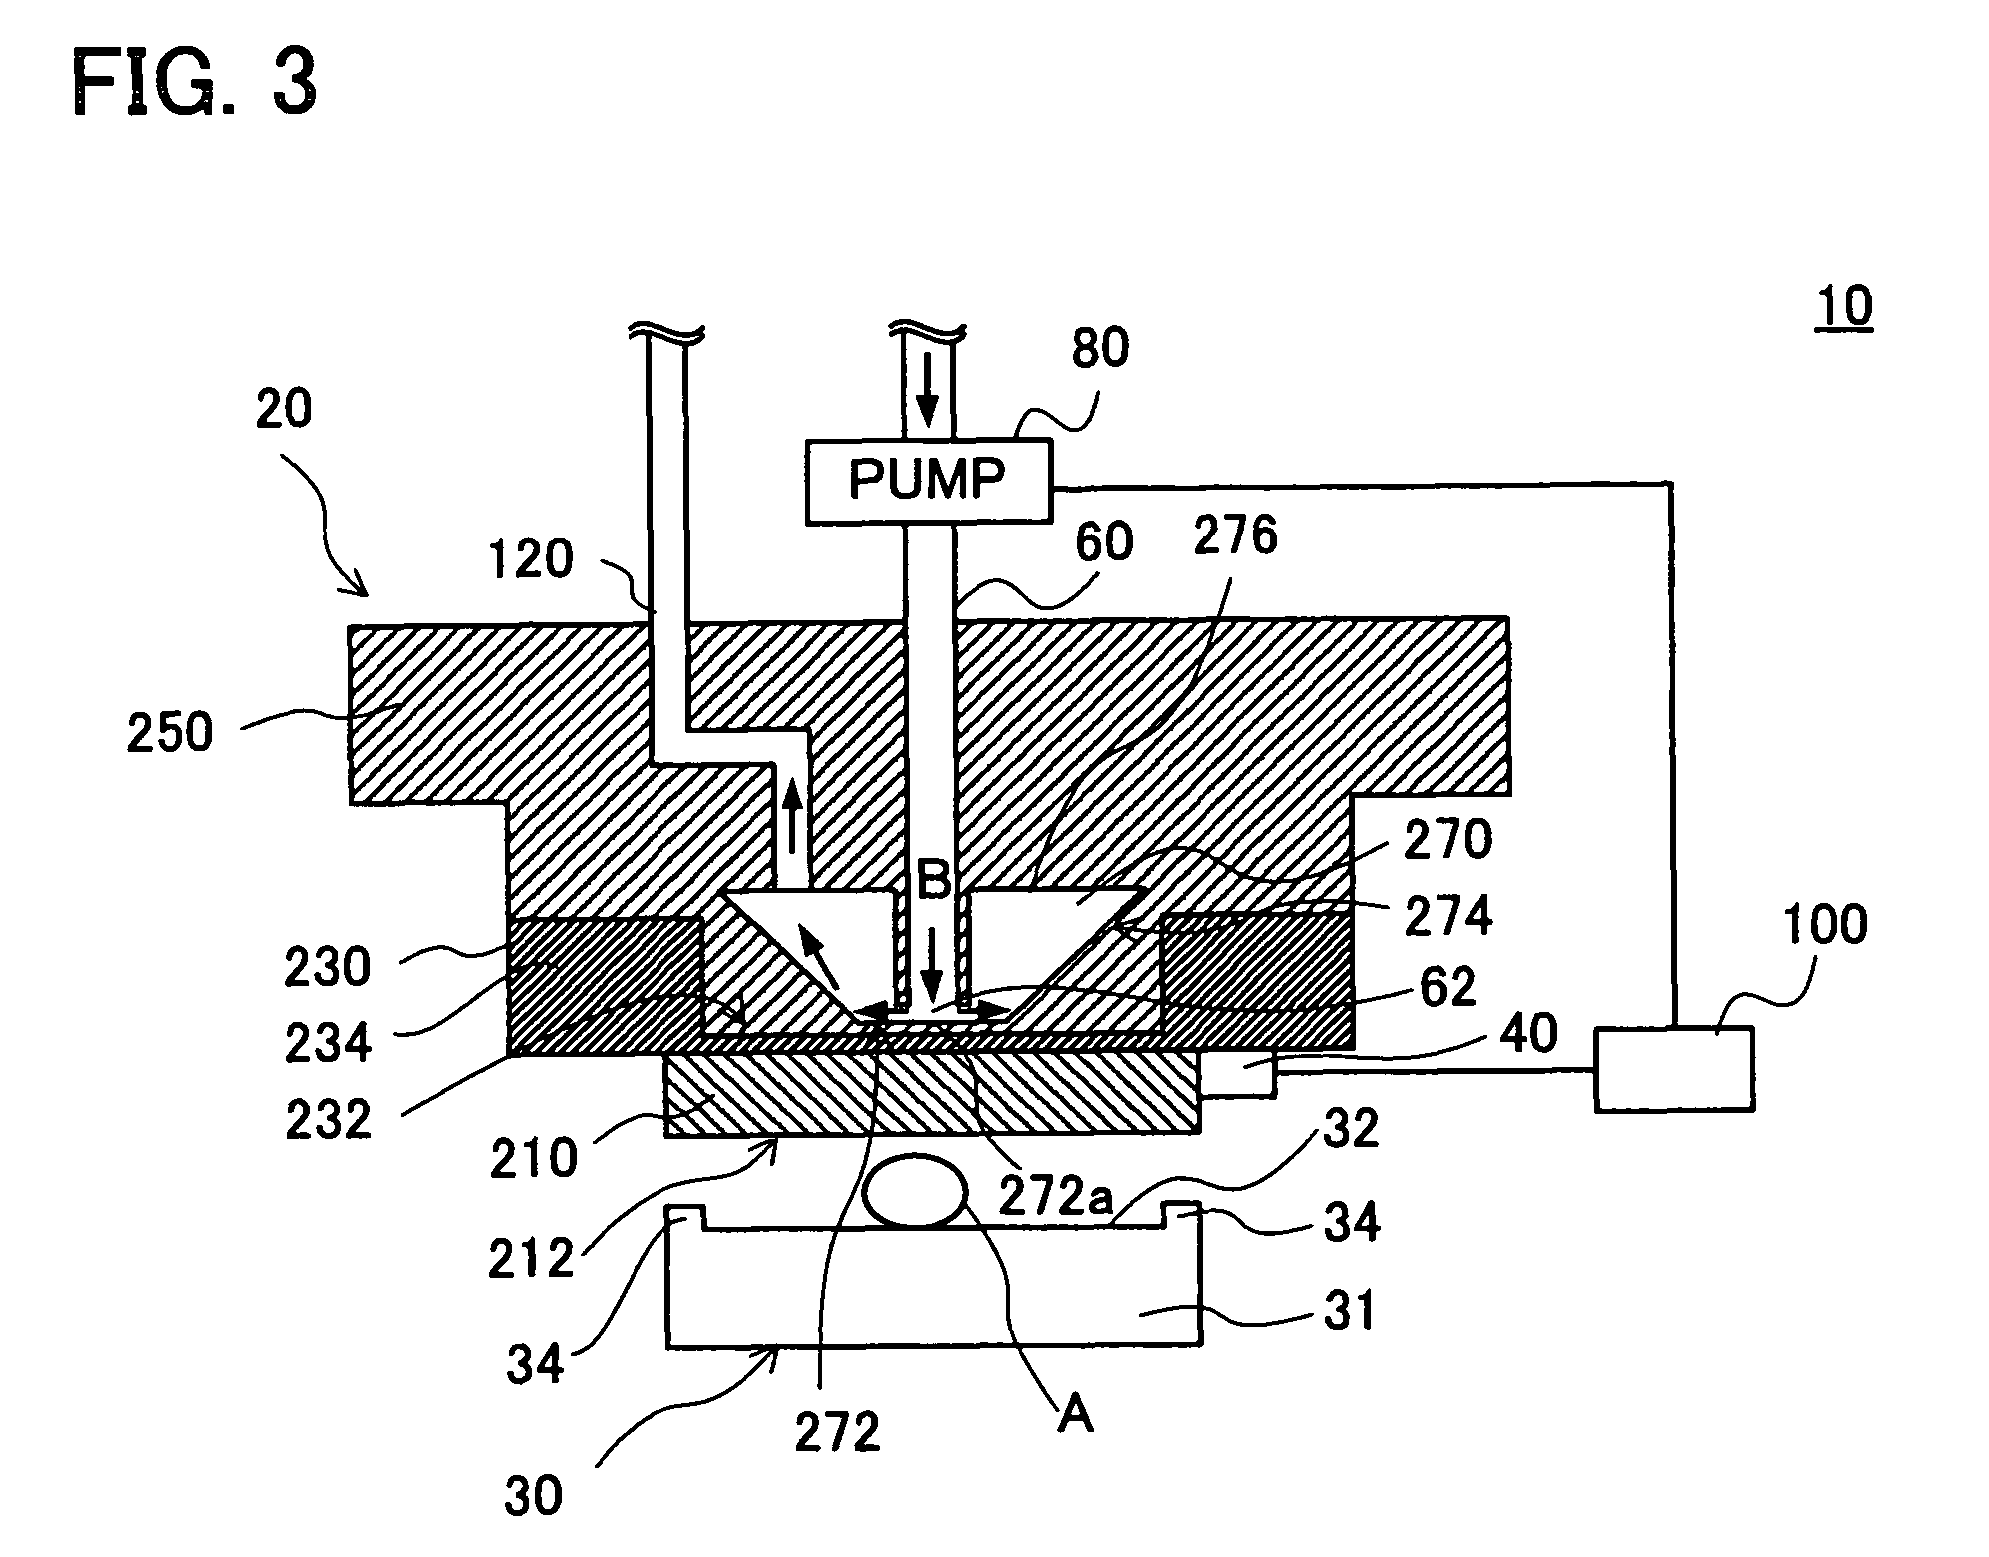 Glass forming apparatus and method